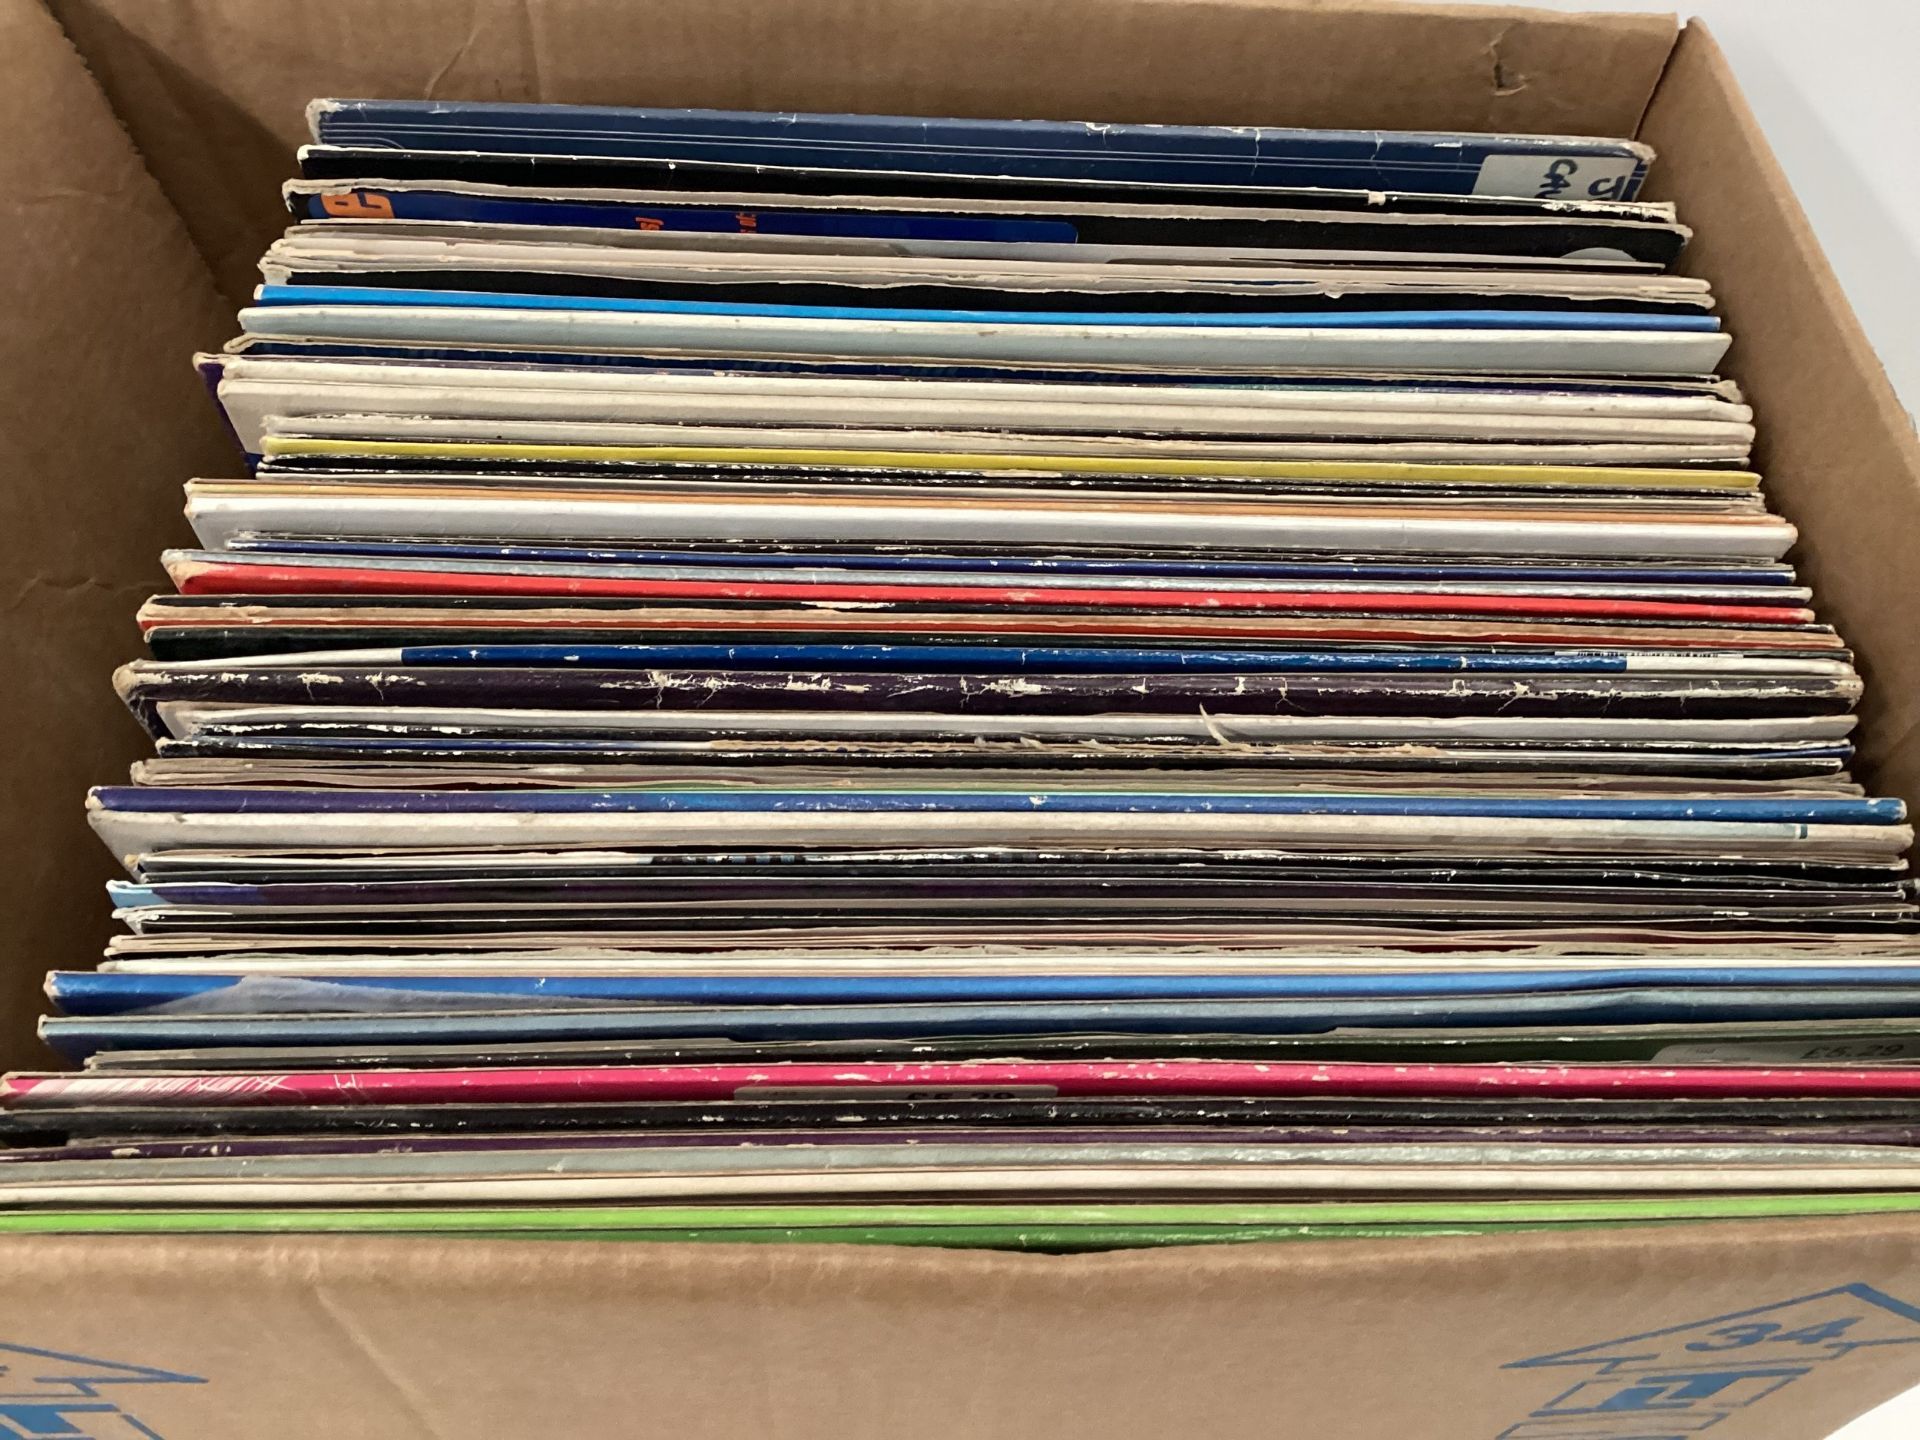 LARGE BOX OF DANCE RELATED 12” VINYL SINGLES. Mainly covering all genres of house music. Found in